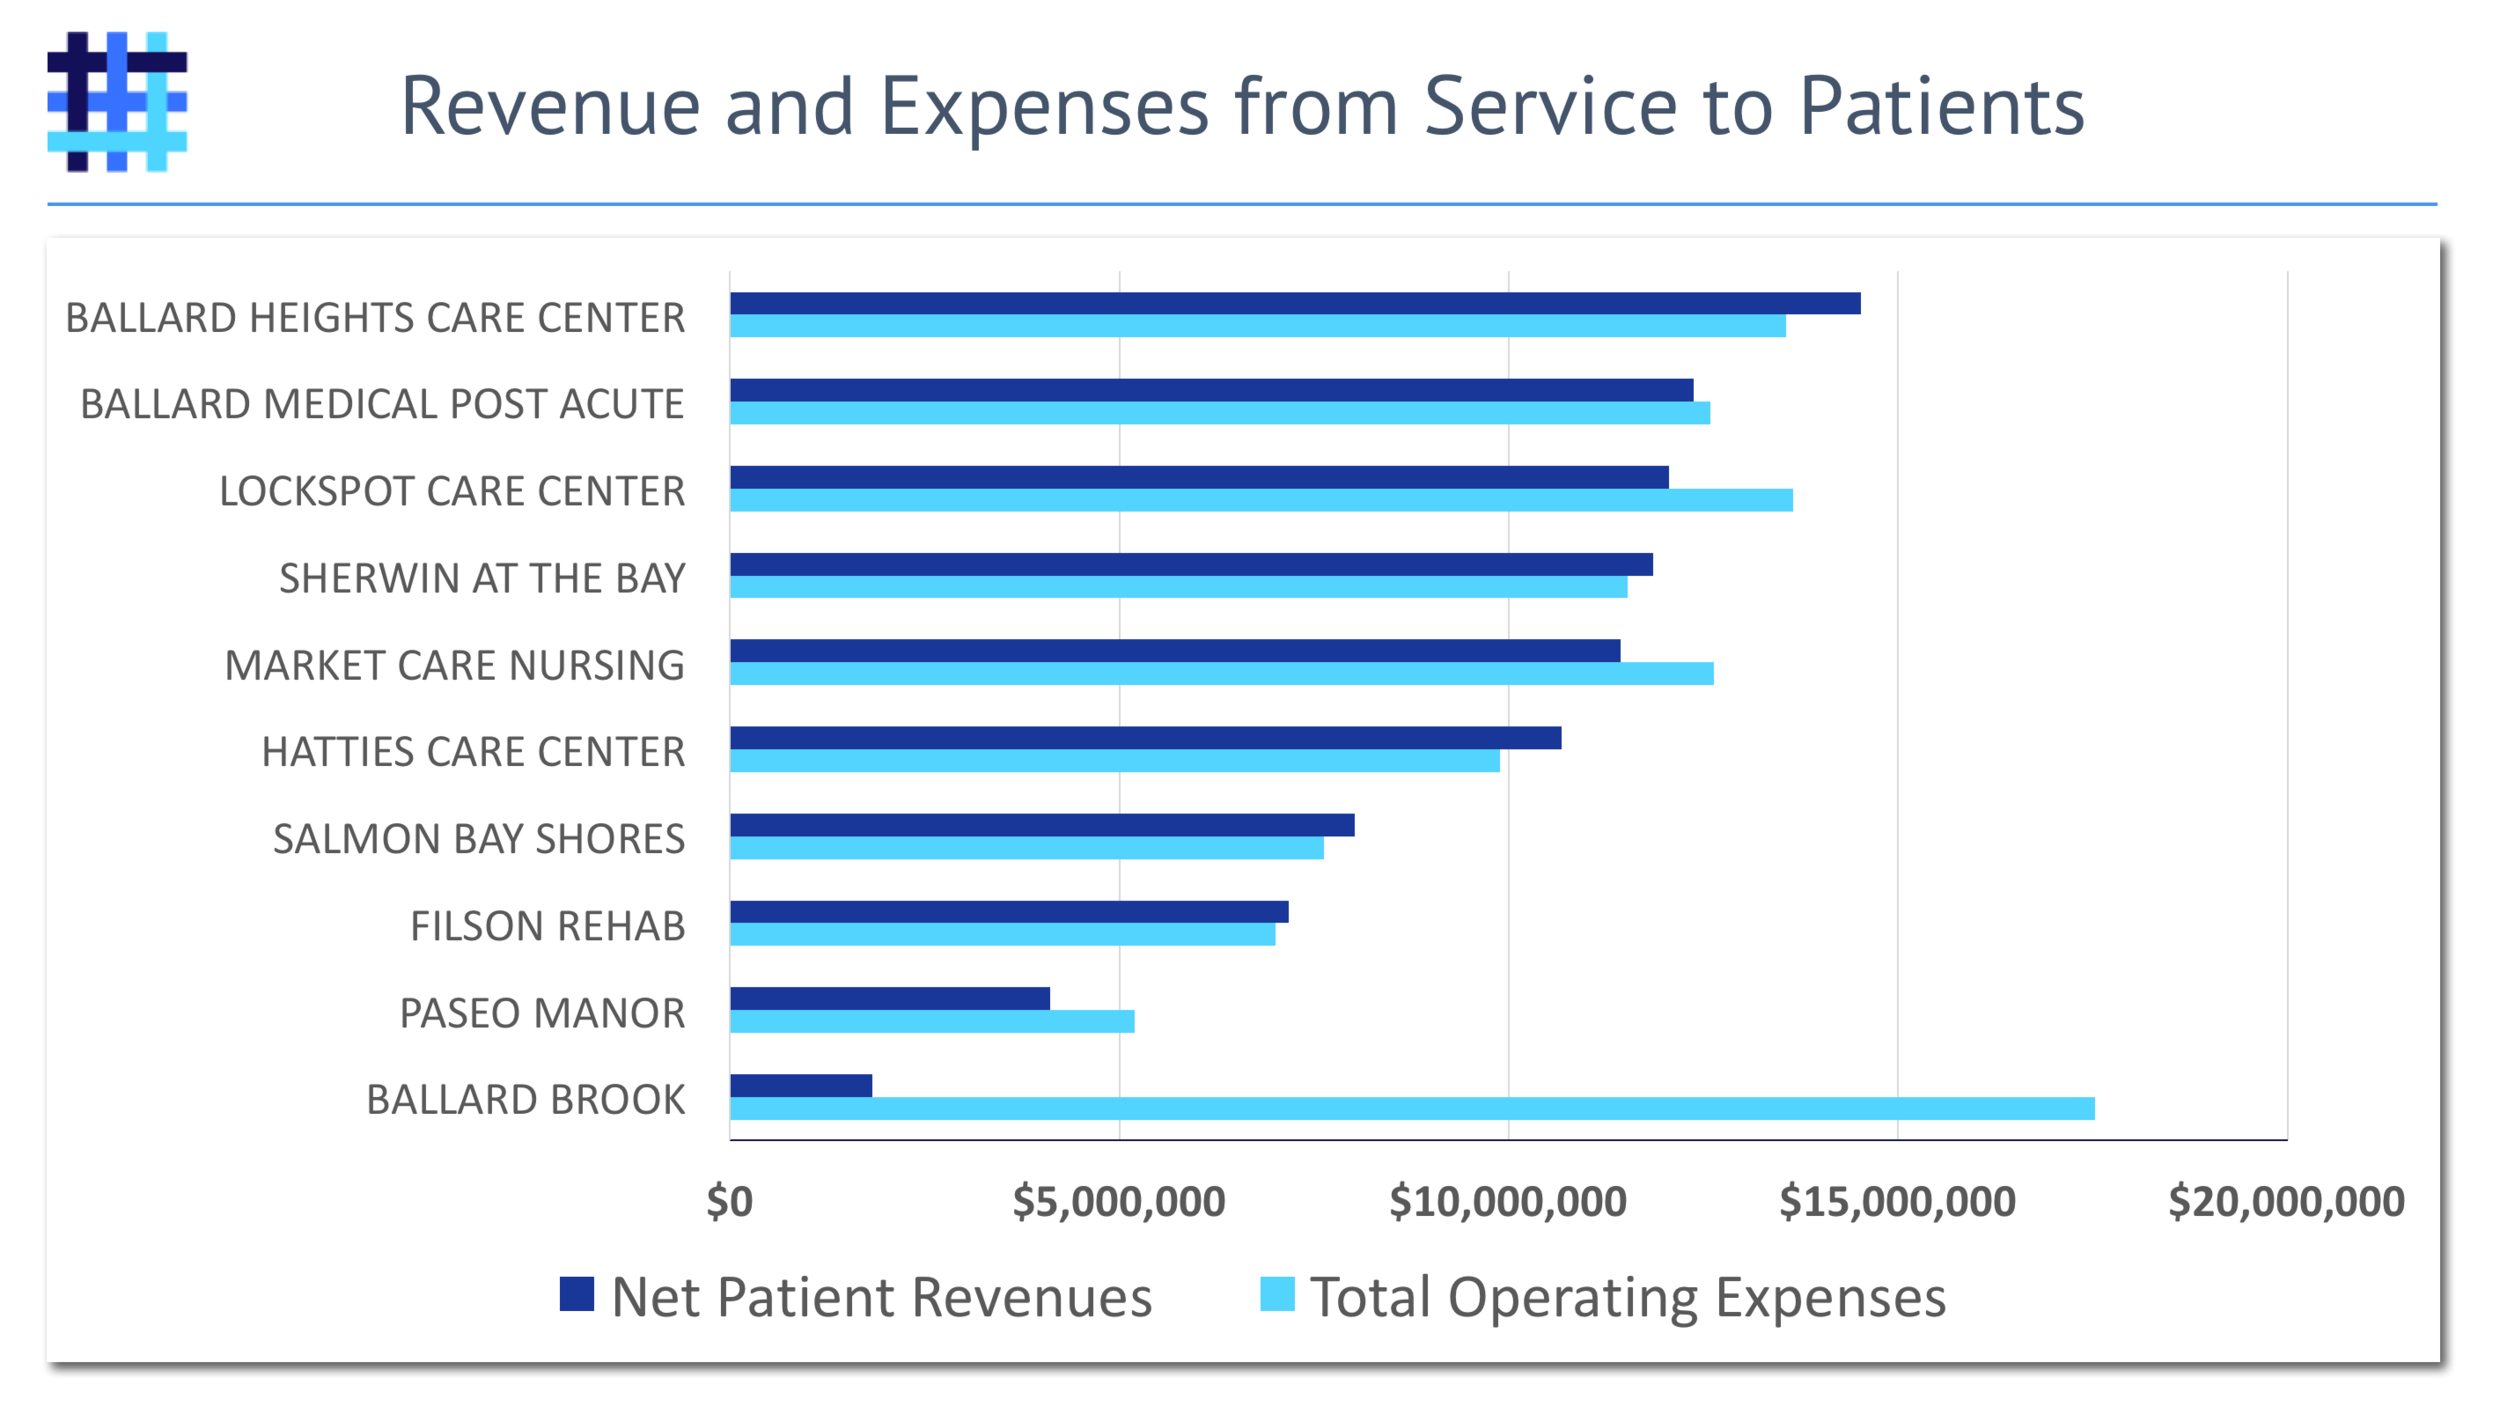 Nursing Home Revenue from Service to Patients and Expenses